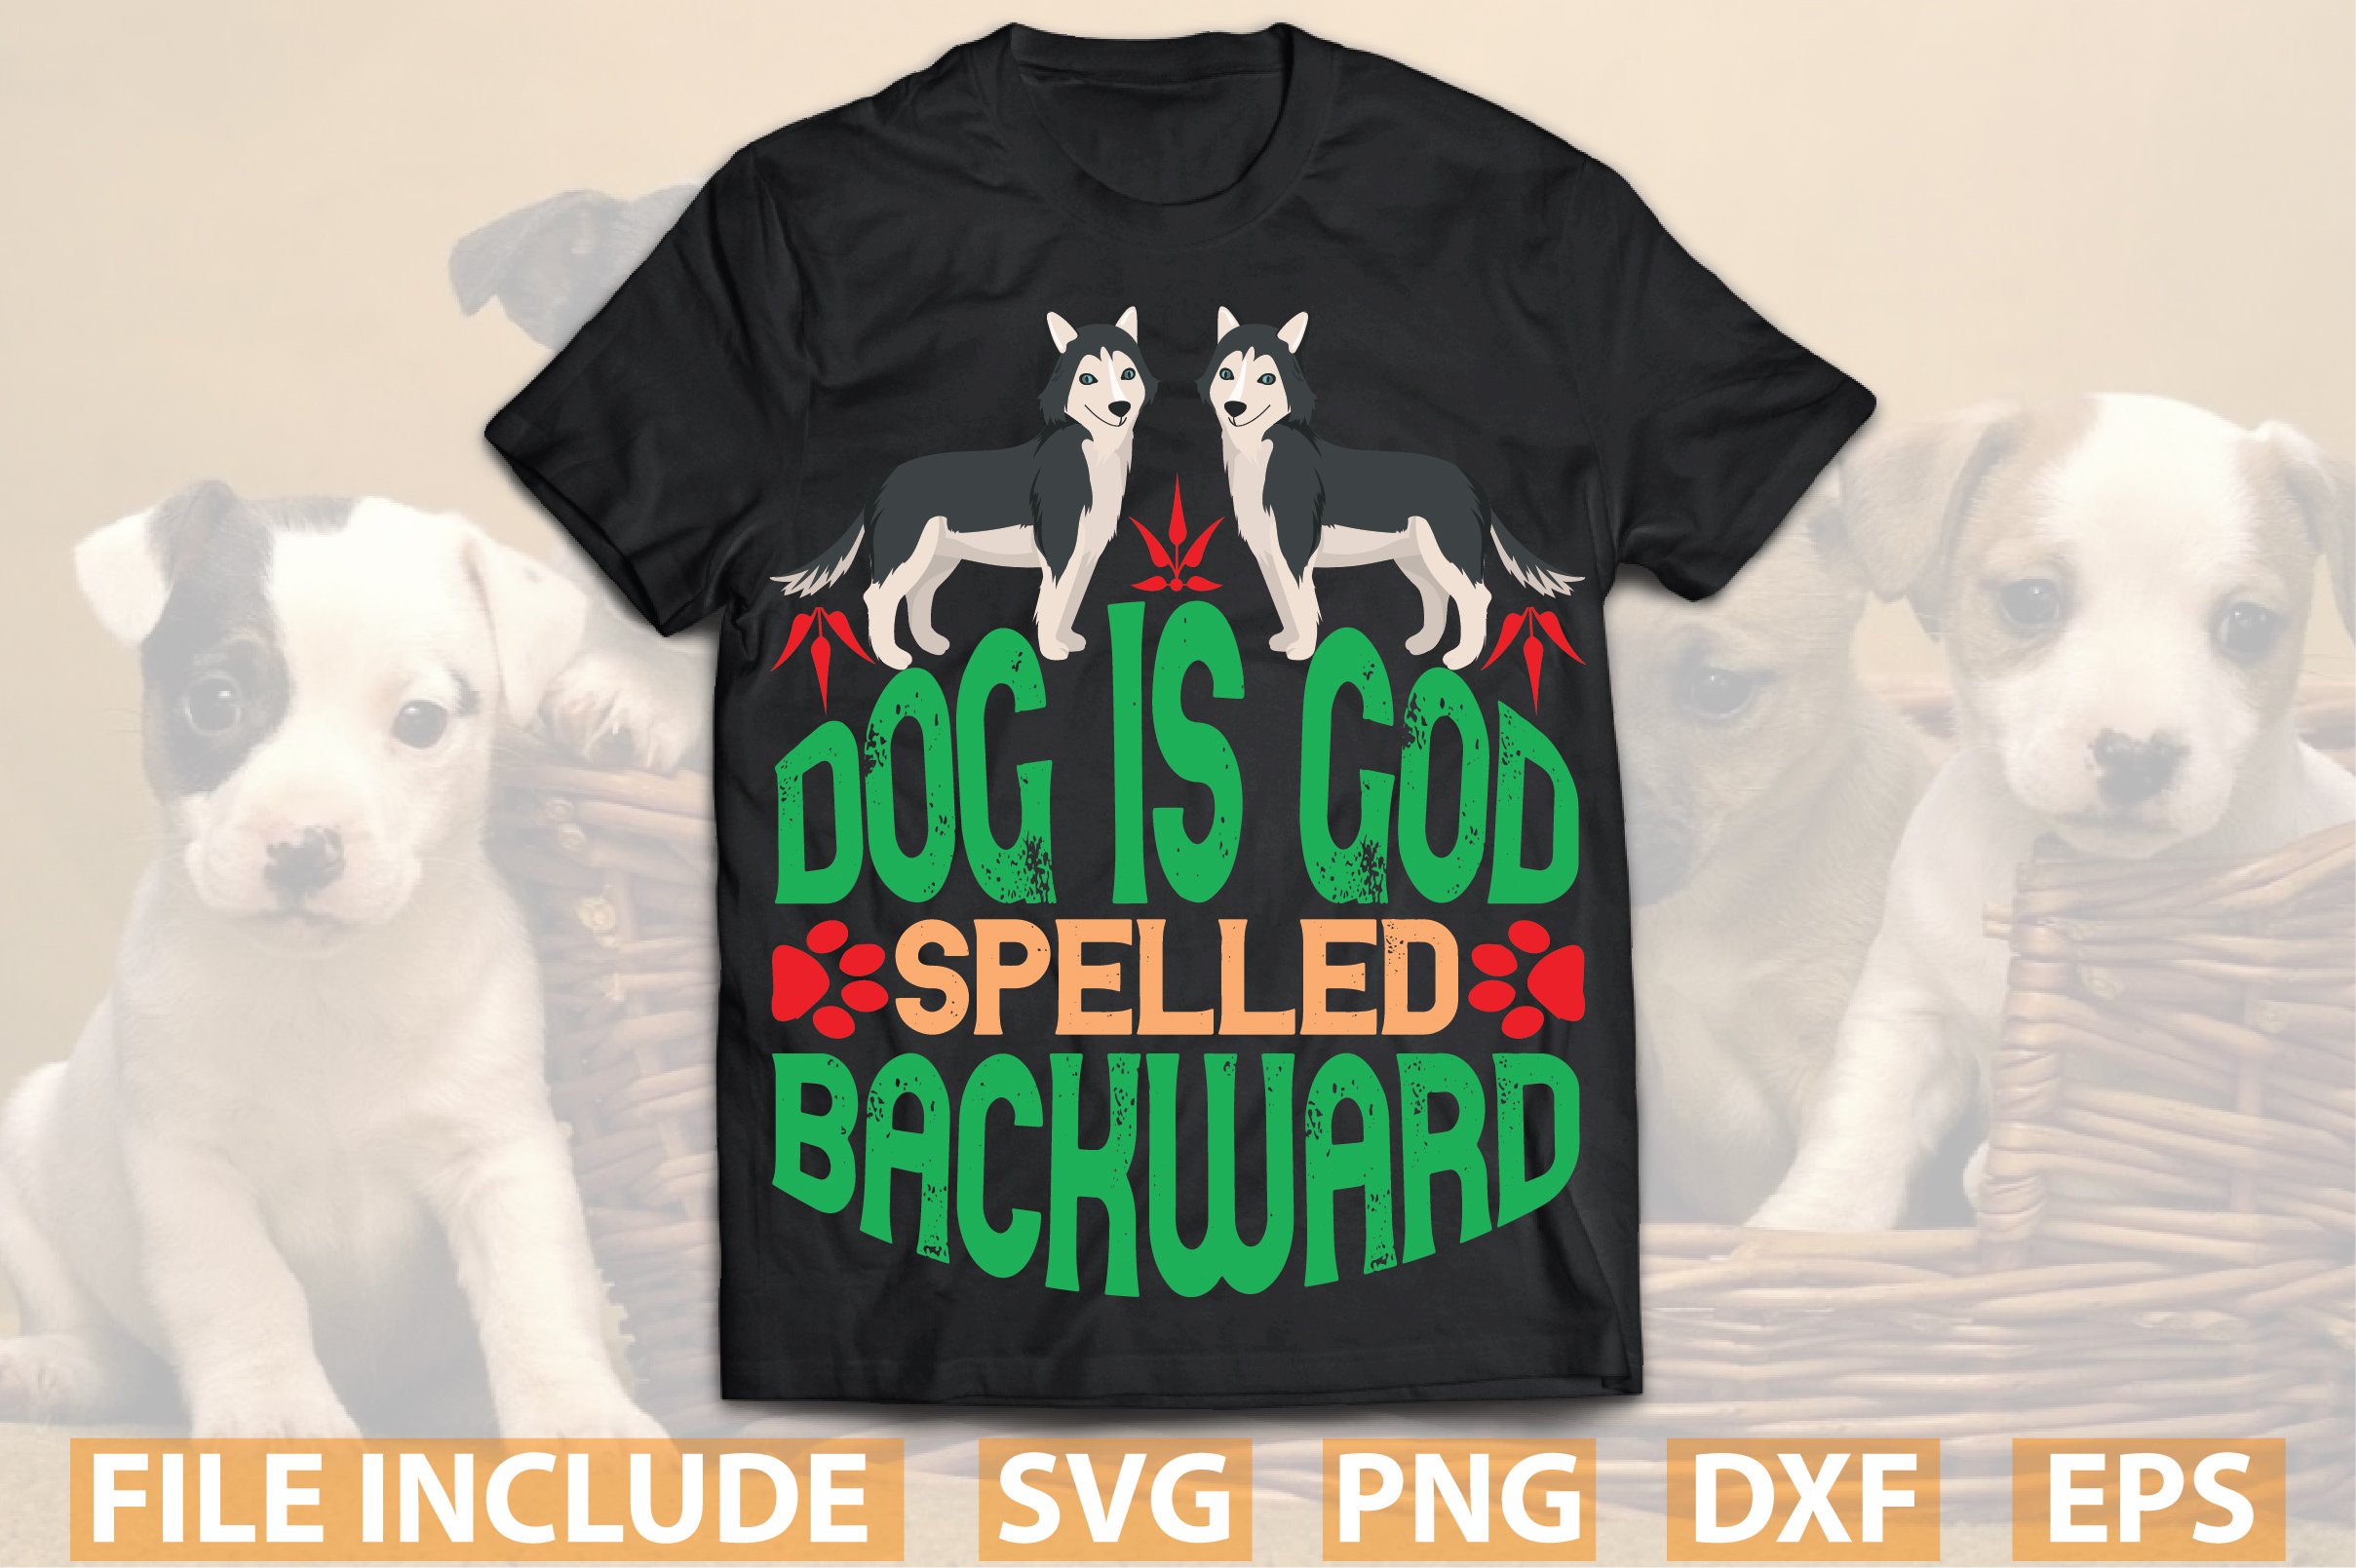 Two dogs and green font on a black t-shirt.